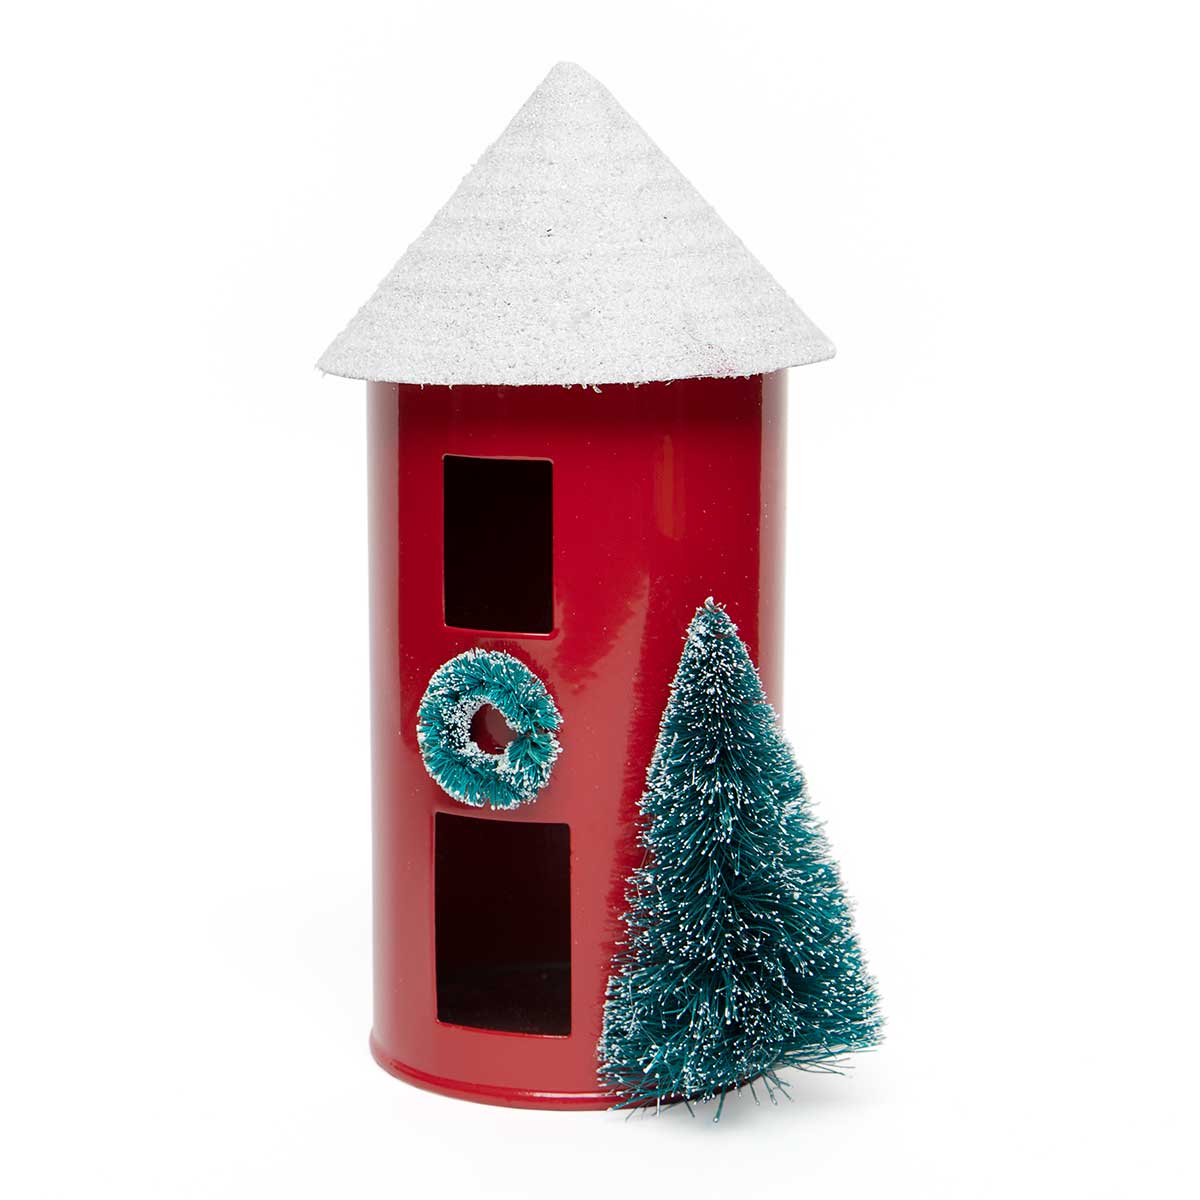 Metal Silo Red with Snow/Glitter/Mica Roof, Pine Wreath and Tree